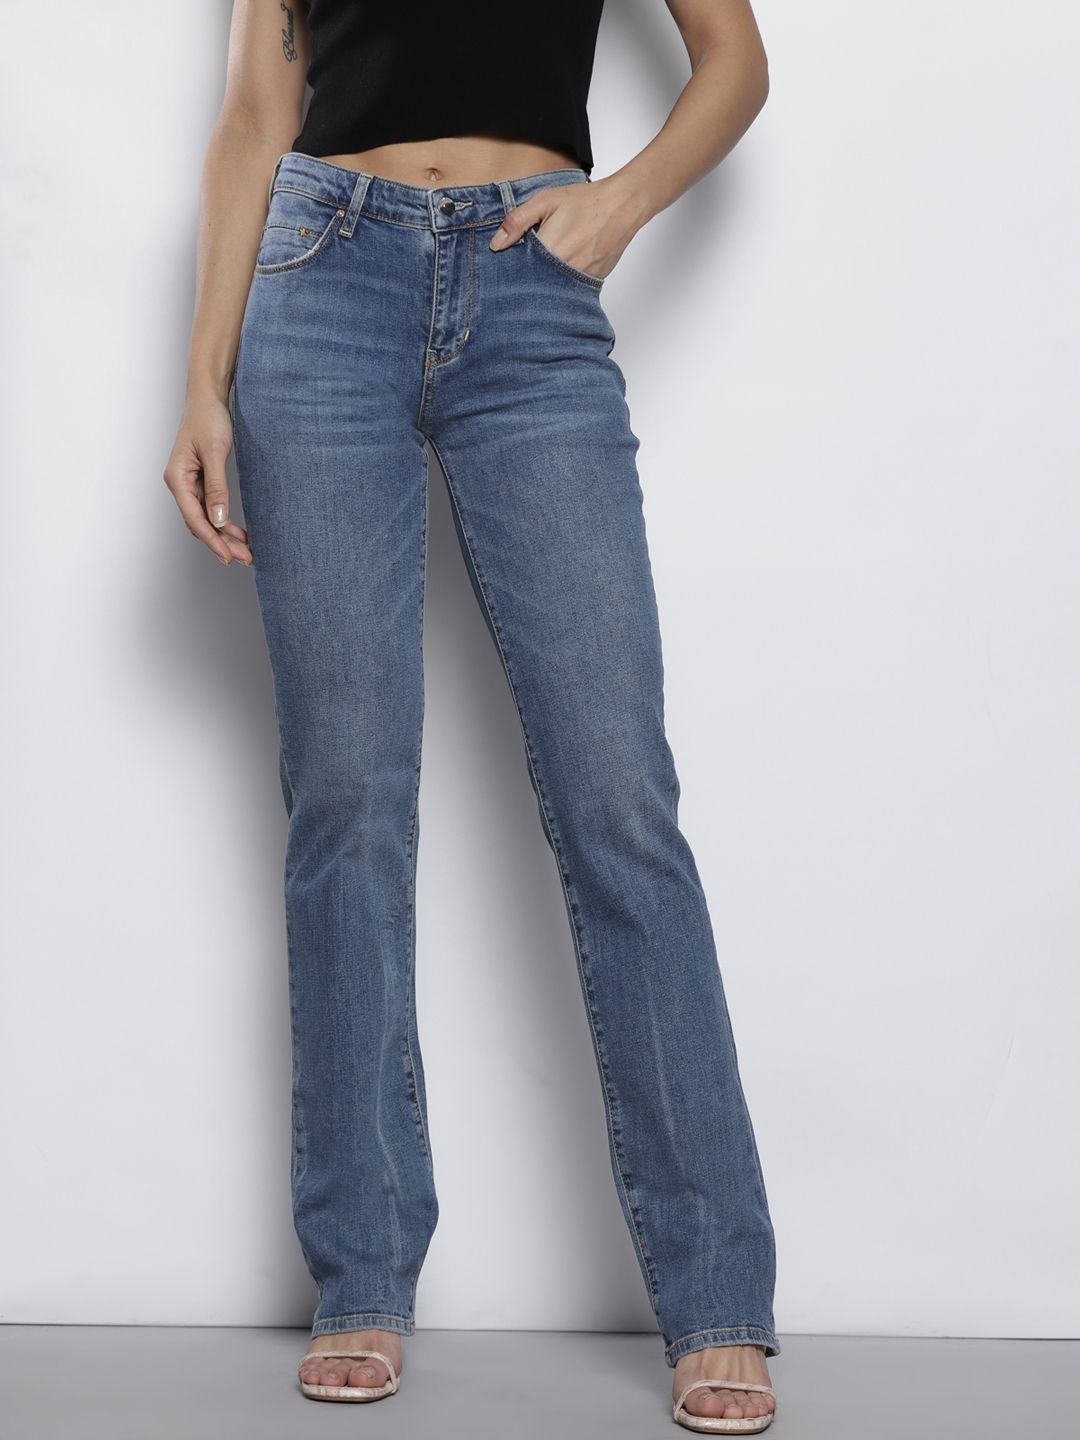 GUESS Women Blue Straight Fit Light Fade Jeans Price in India